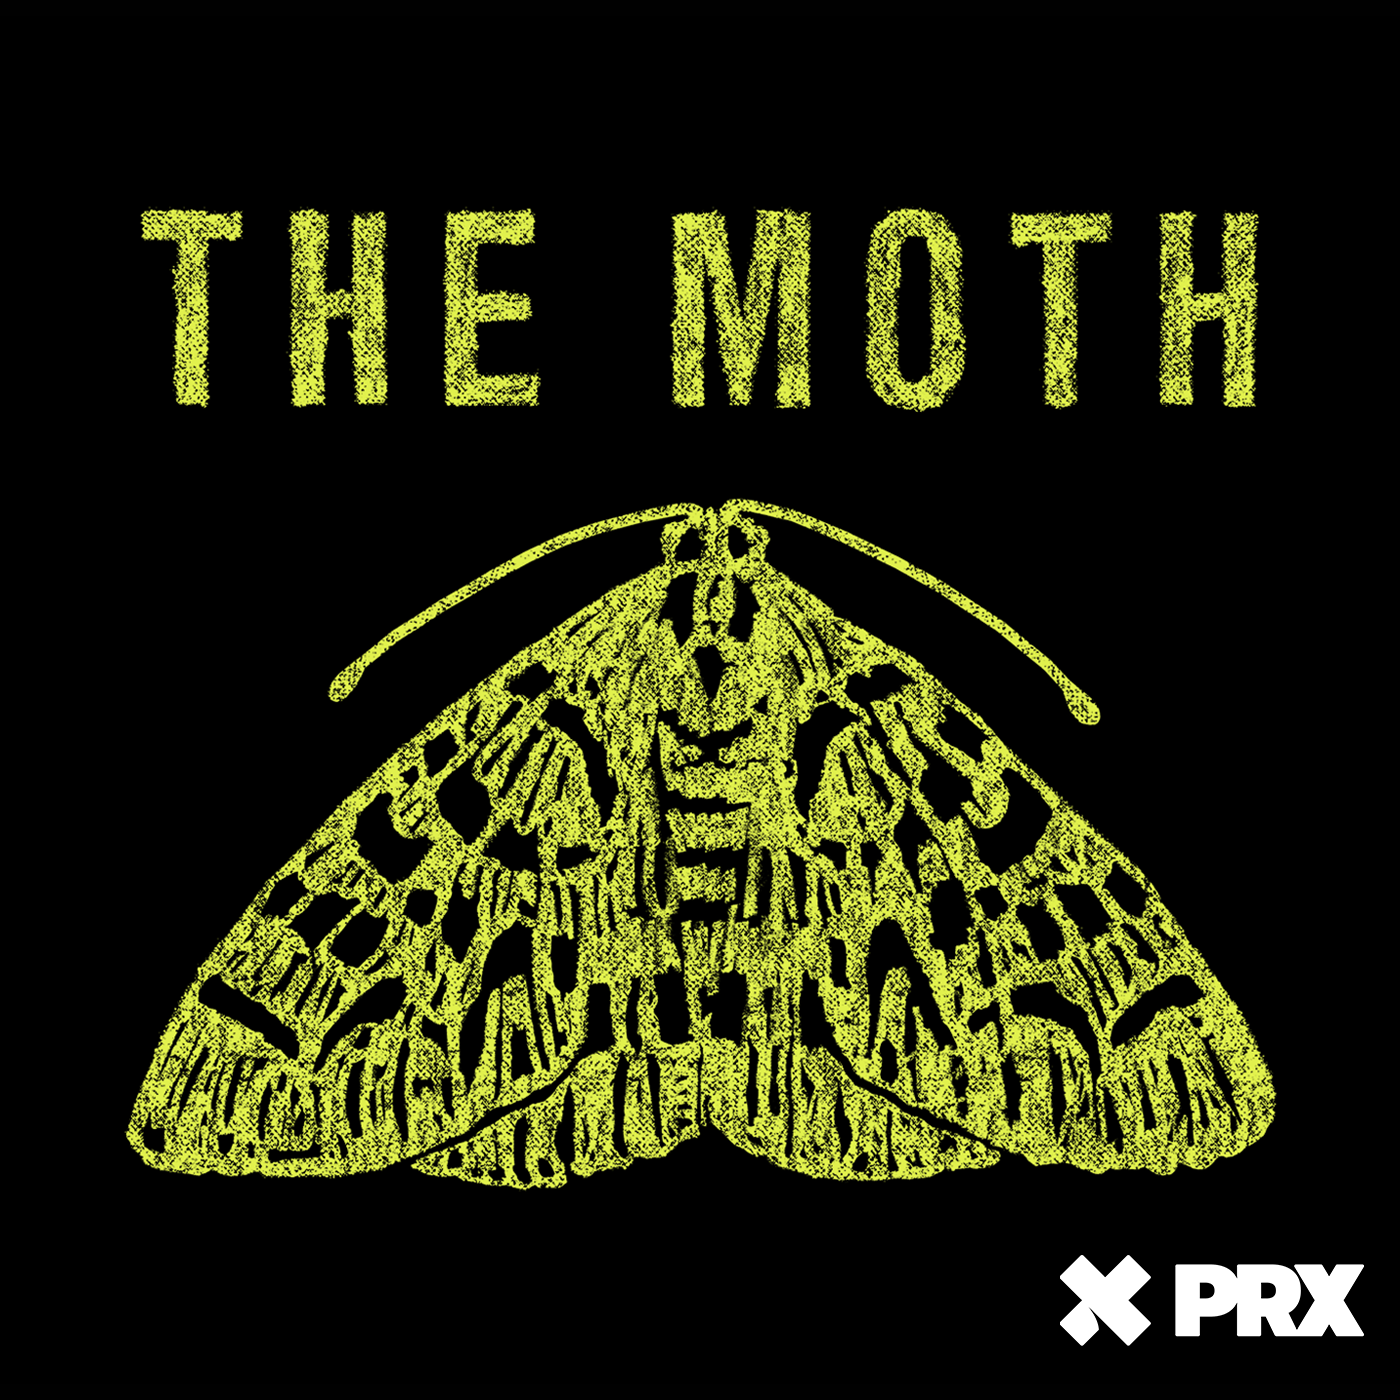 The Moth Radio Hour: Not for the Faint of Heart